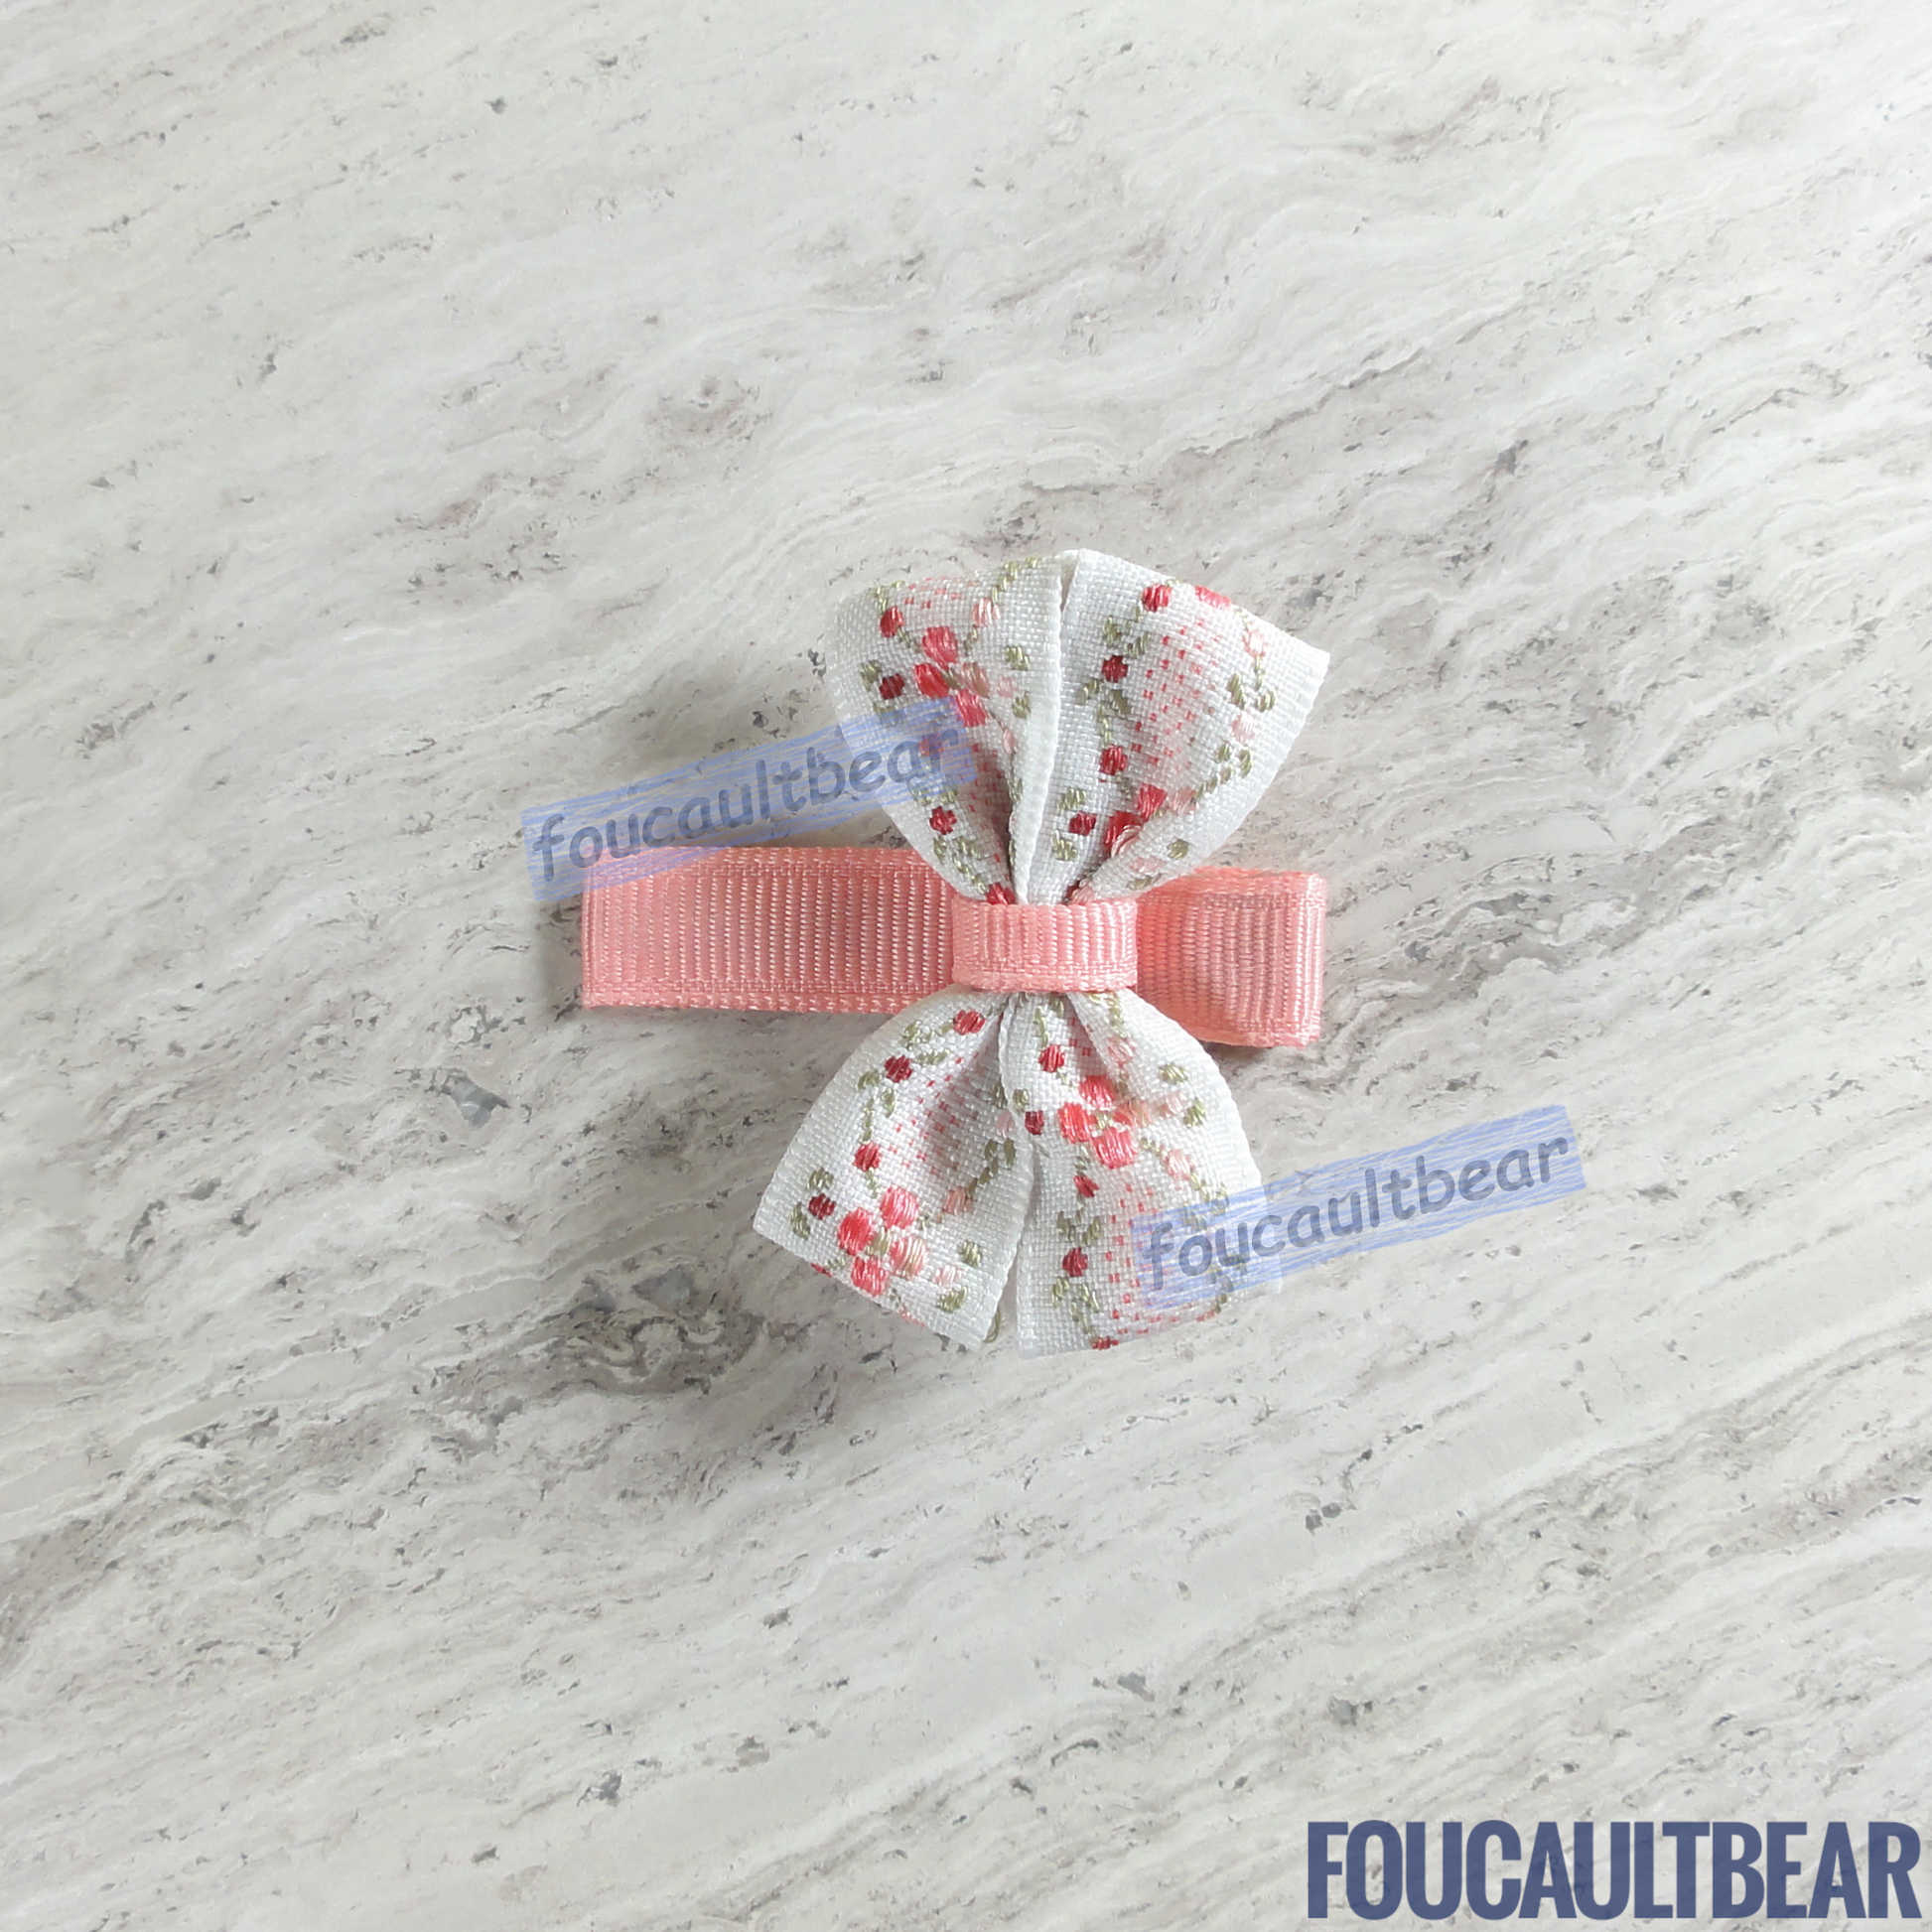 Foucaultbear's HANDMADE HAIR CLIPPIE. Garland Rose Bud. Jacquard Ribbon. Partially Lined Alligator Hair Clip. Garland Rose Bud, a beautiful flower Jacquard Ribbon Hair Bow Clippie. A nice addition to your little girl's wardrobe. Perfect for toddlers, preschoolers, elementary-schoolers. Absolutely adorable on babies with enough hair to wear it too. Makes for a great Baby Shower gift. Definitely not your standard cliché shower gift. 